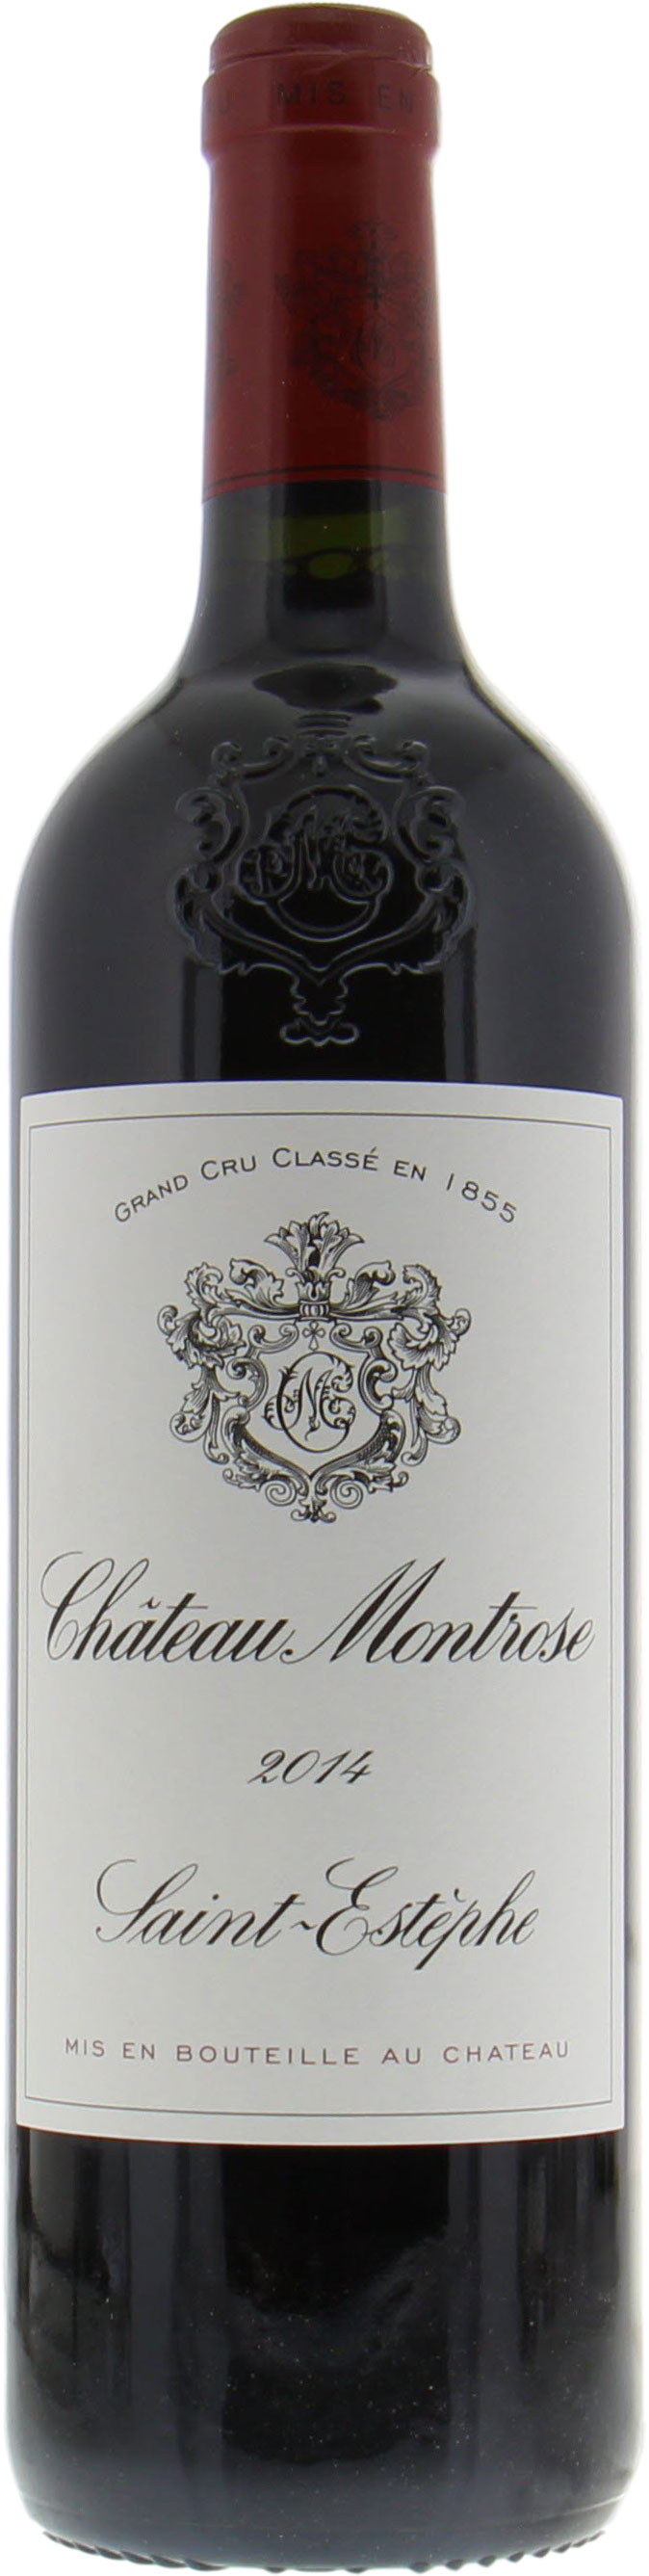 2014 Online Chateau Best Buy | | Wines Montrose of